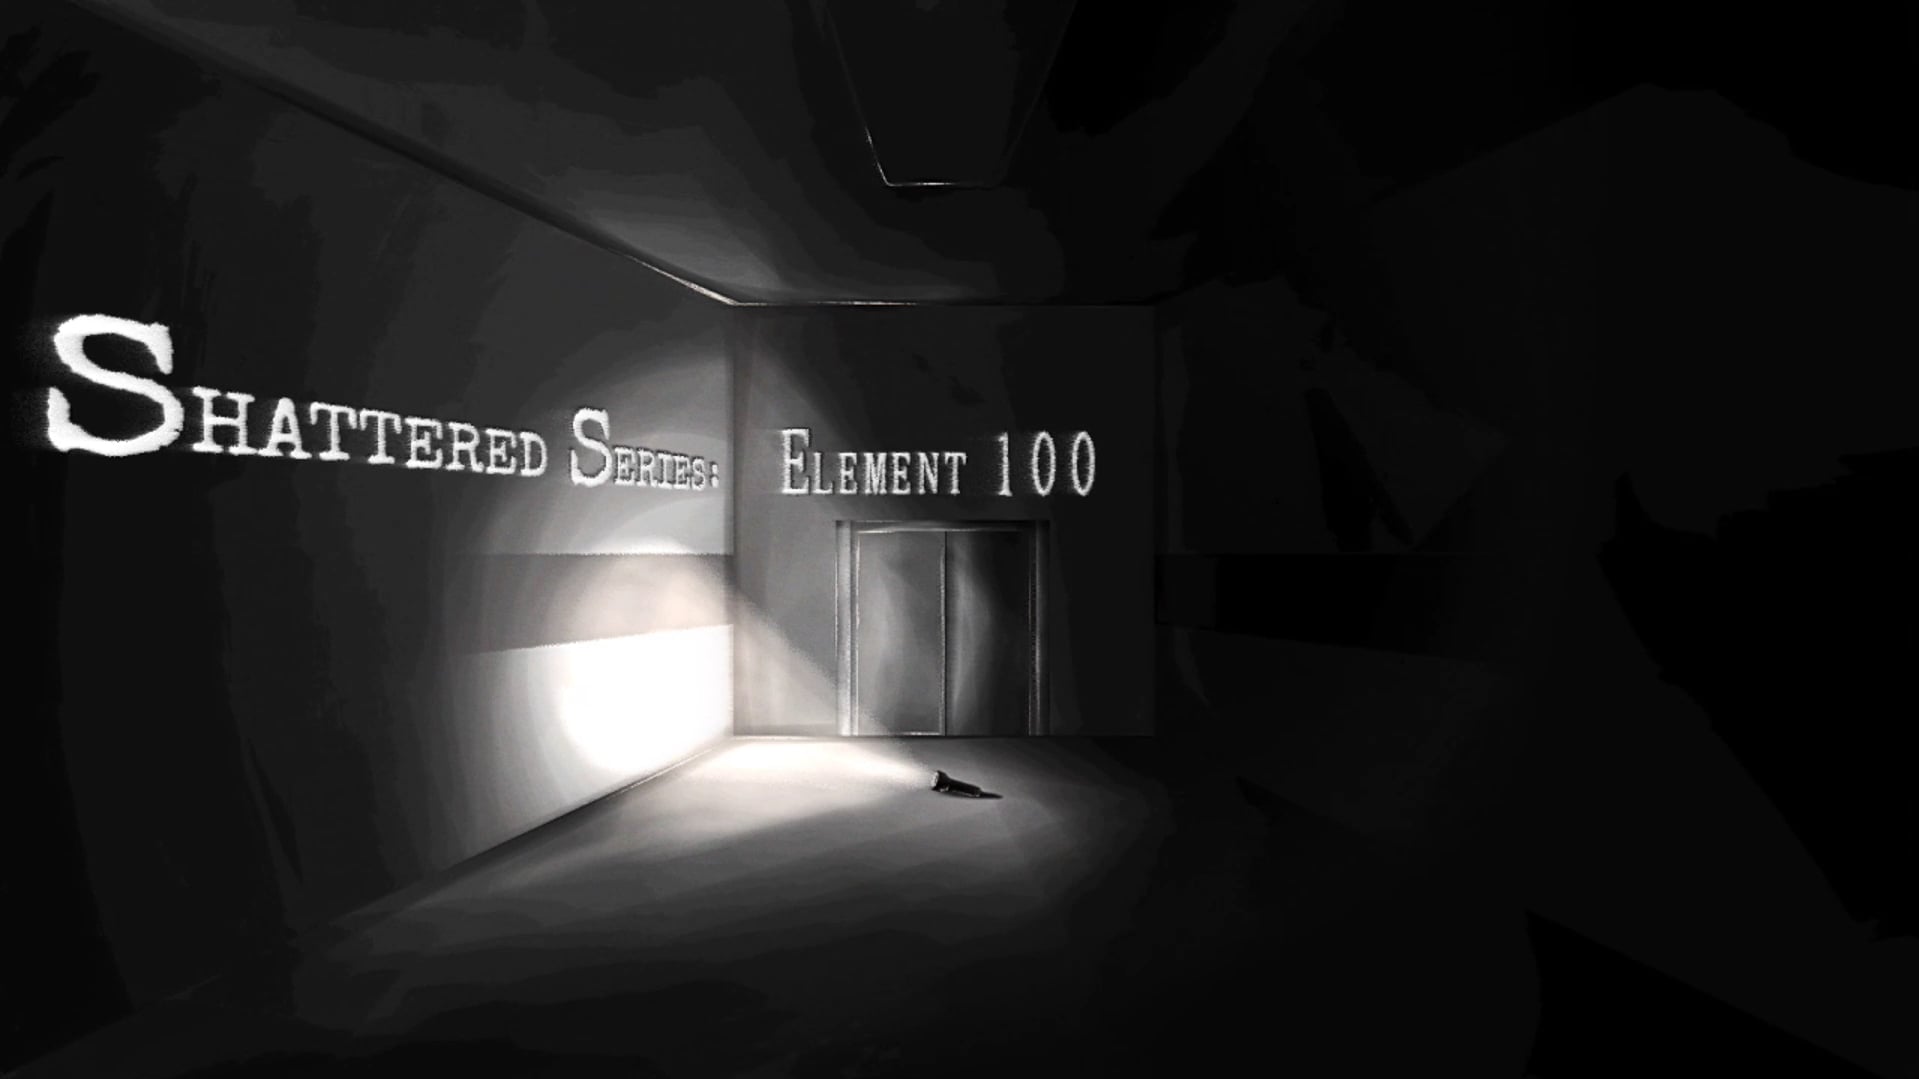 Shattered Series: Element 100